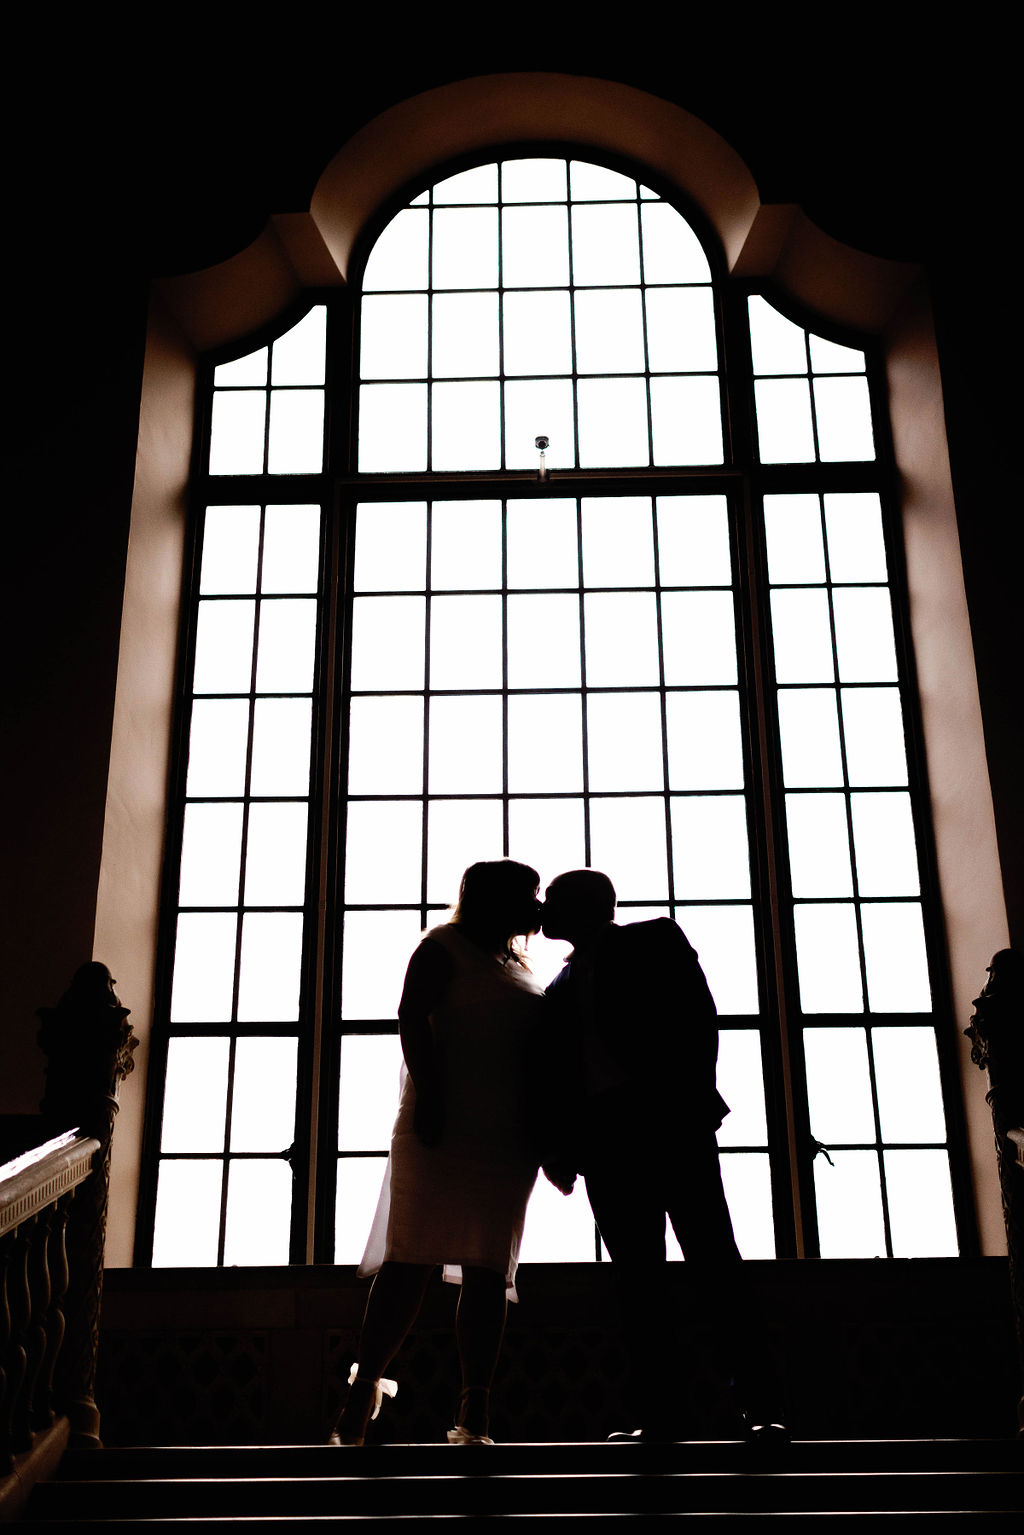 Hannah and Jimmy kissing in the window as they are silhouetted by the sunlight. |Photo by California Photographer Sarah Block Photography